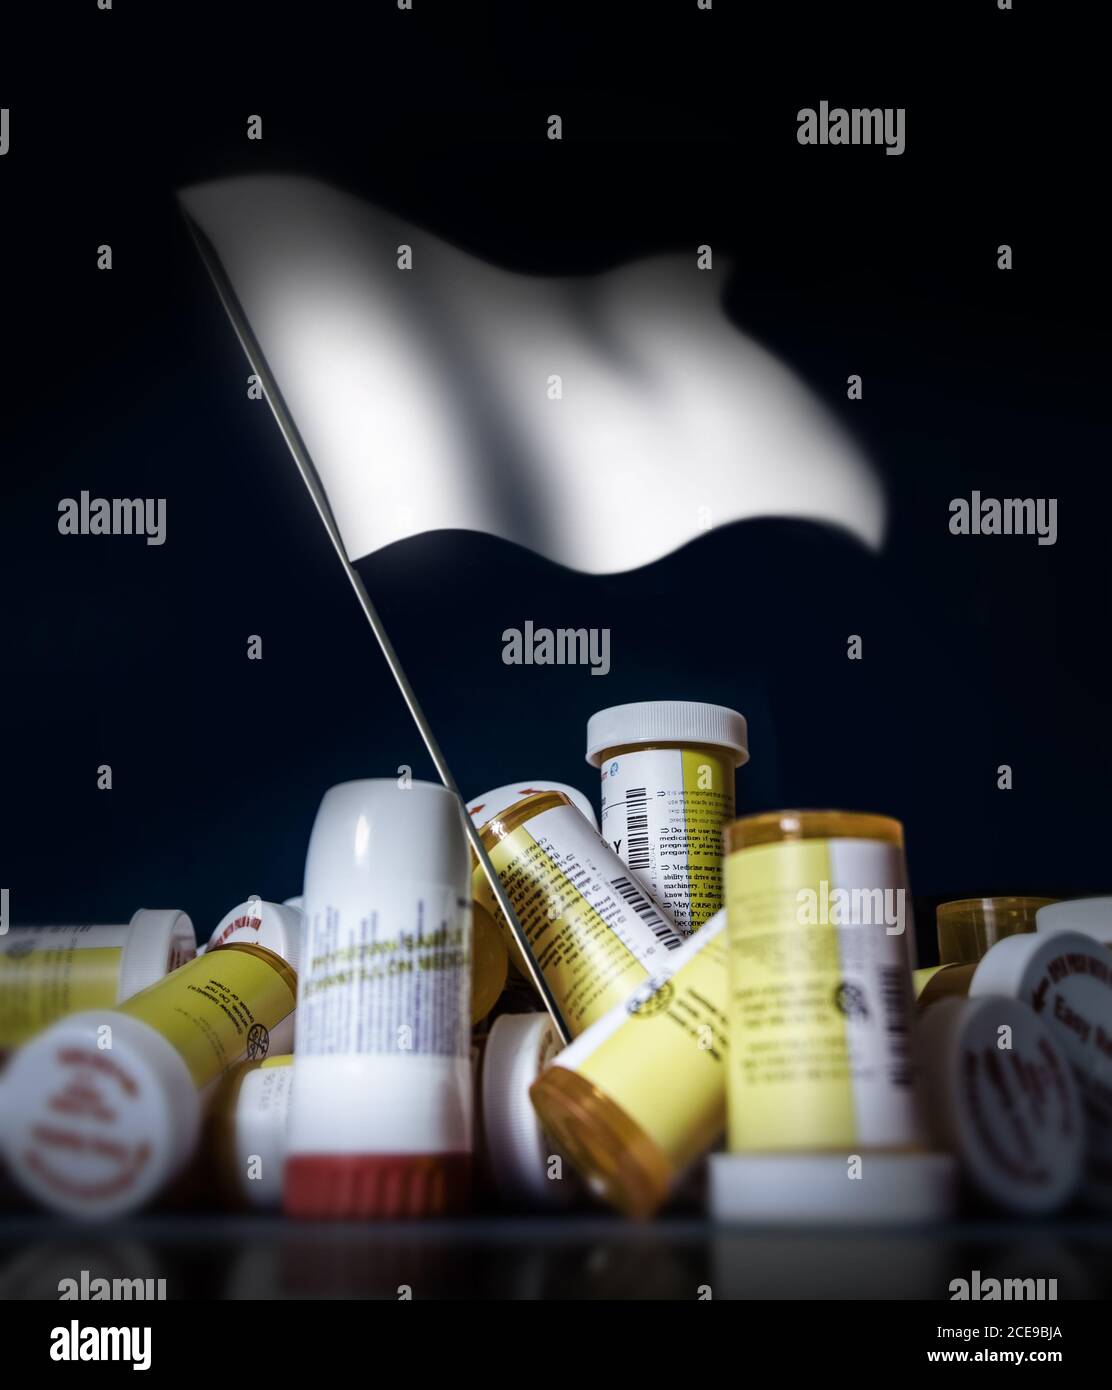 In the center of a pile of pills containers and other drugs, a white flag rises. Stock Photo